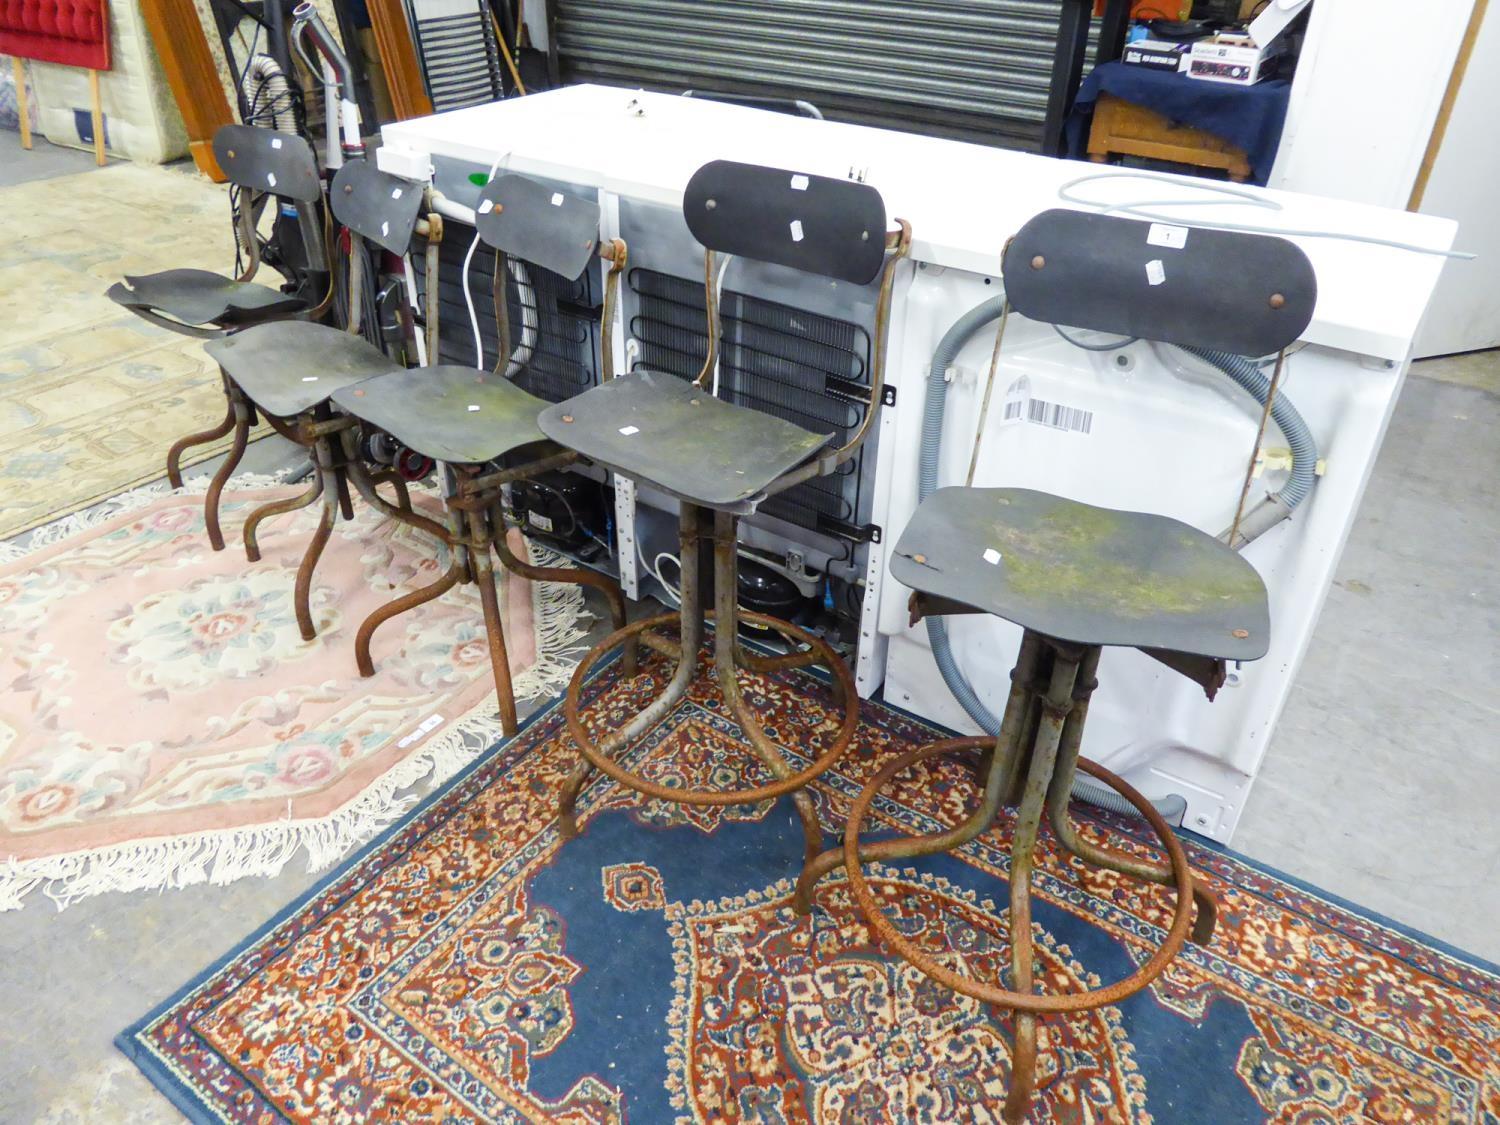 TWO TALL INDUSTRIAL MACHINISTS CHAIRS, ON FOUR SPUR BASE AND WITH RUBBER SEATS (AS FOUND) AND